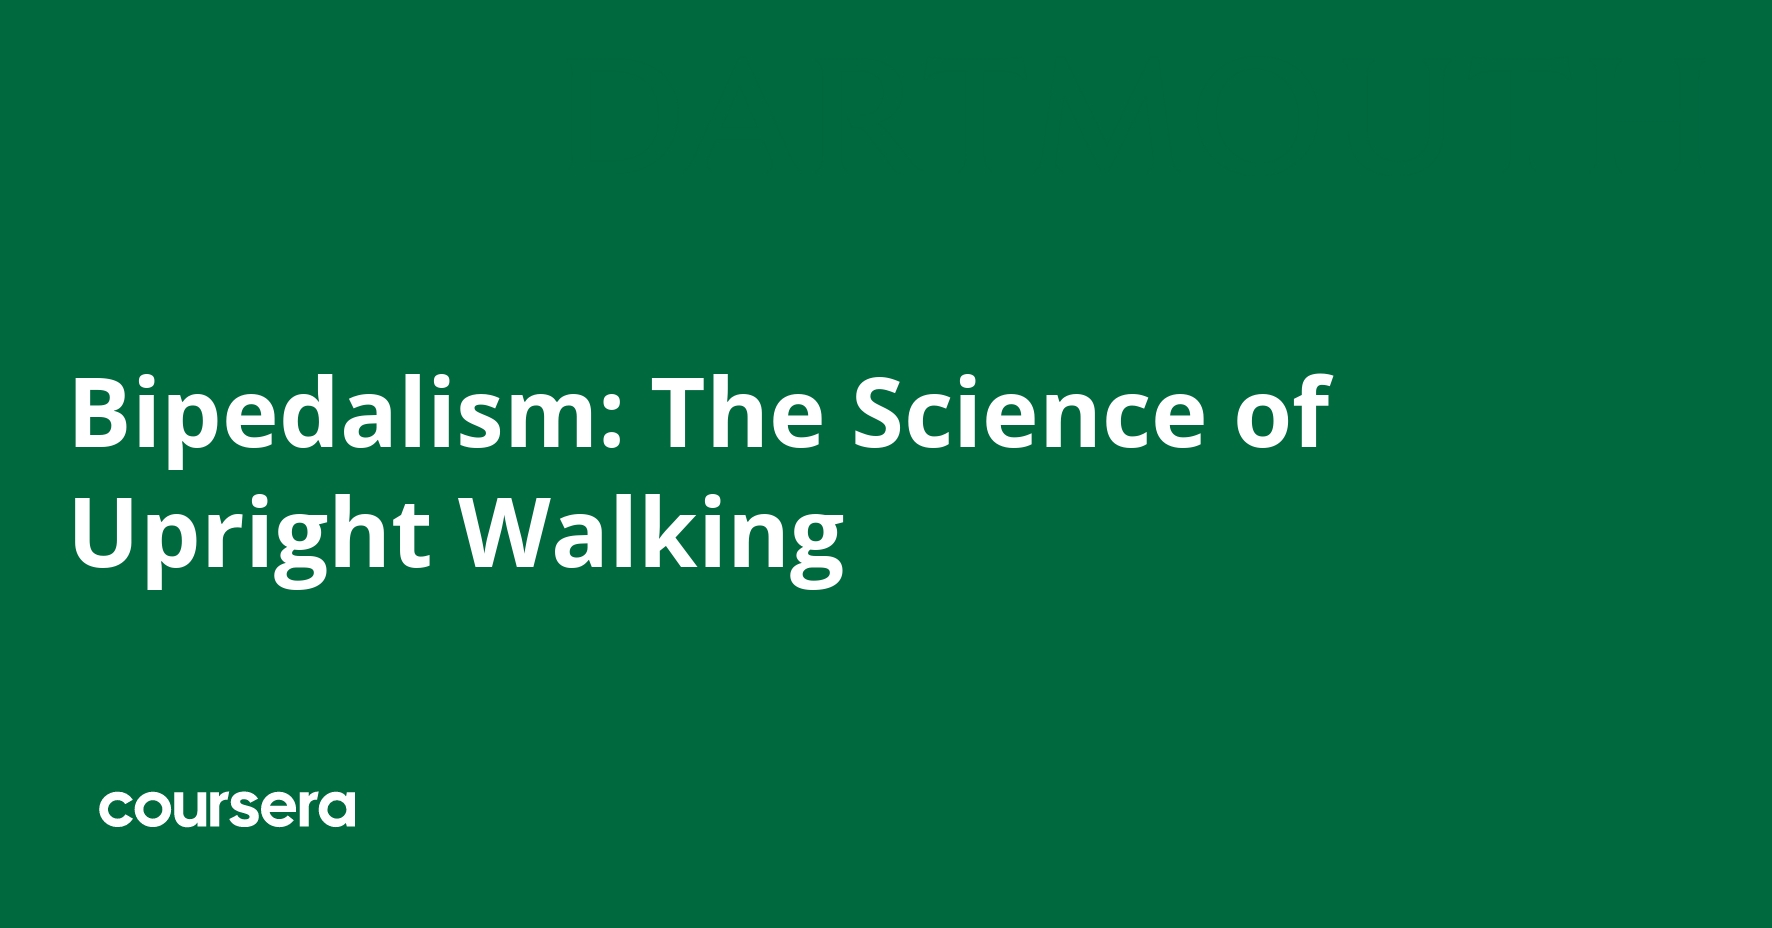 bipedalism-the-science-of-upright-walking